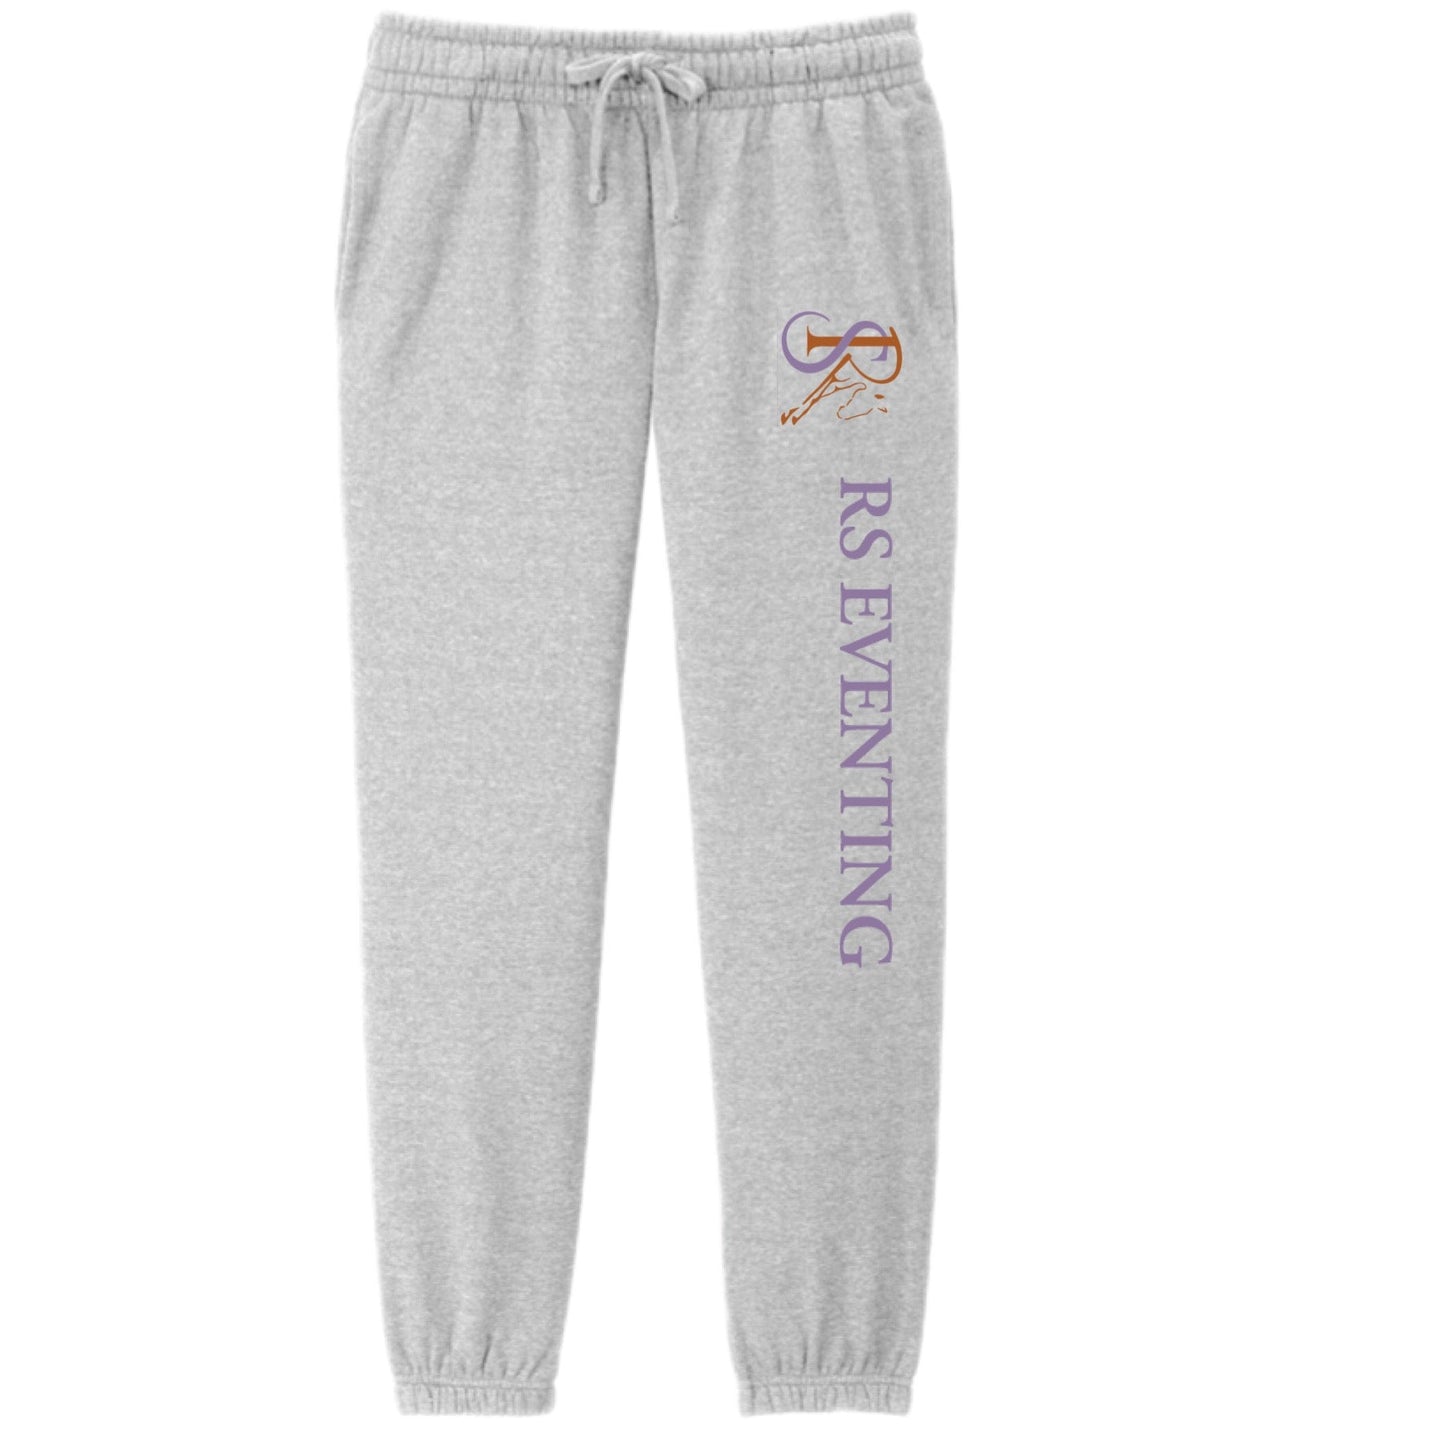 Equestrian Team Apparel RS Eventing Sweat Pants equestrian team apparel online tack store mobile tack store custom farm apparel custom show stable clothing equestrian lifestyle horse show clothing riding clothes horses equestrian tack store